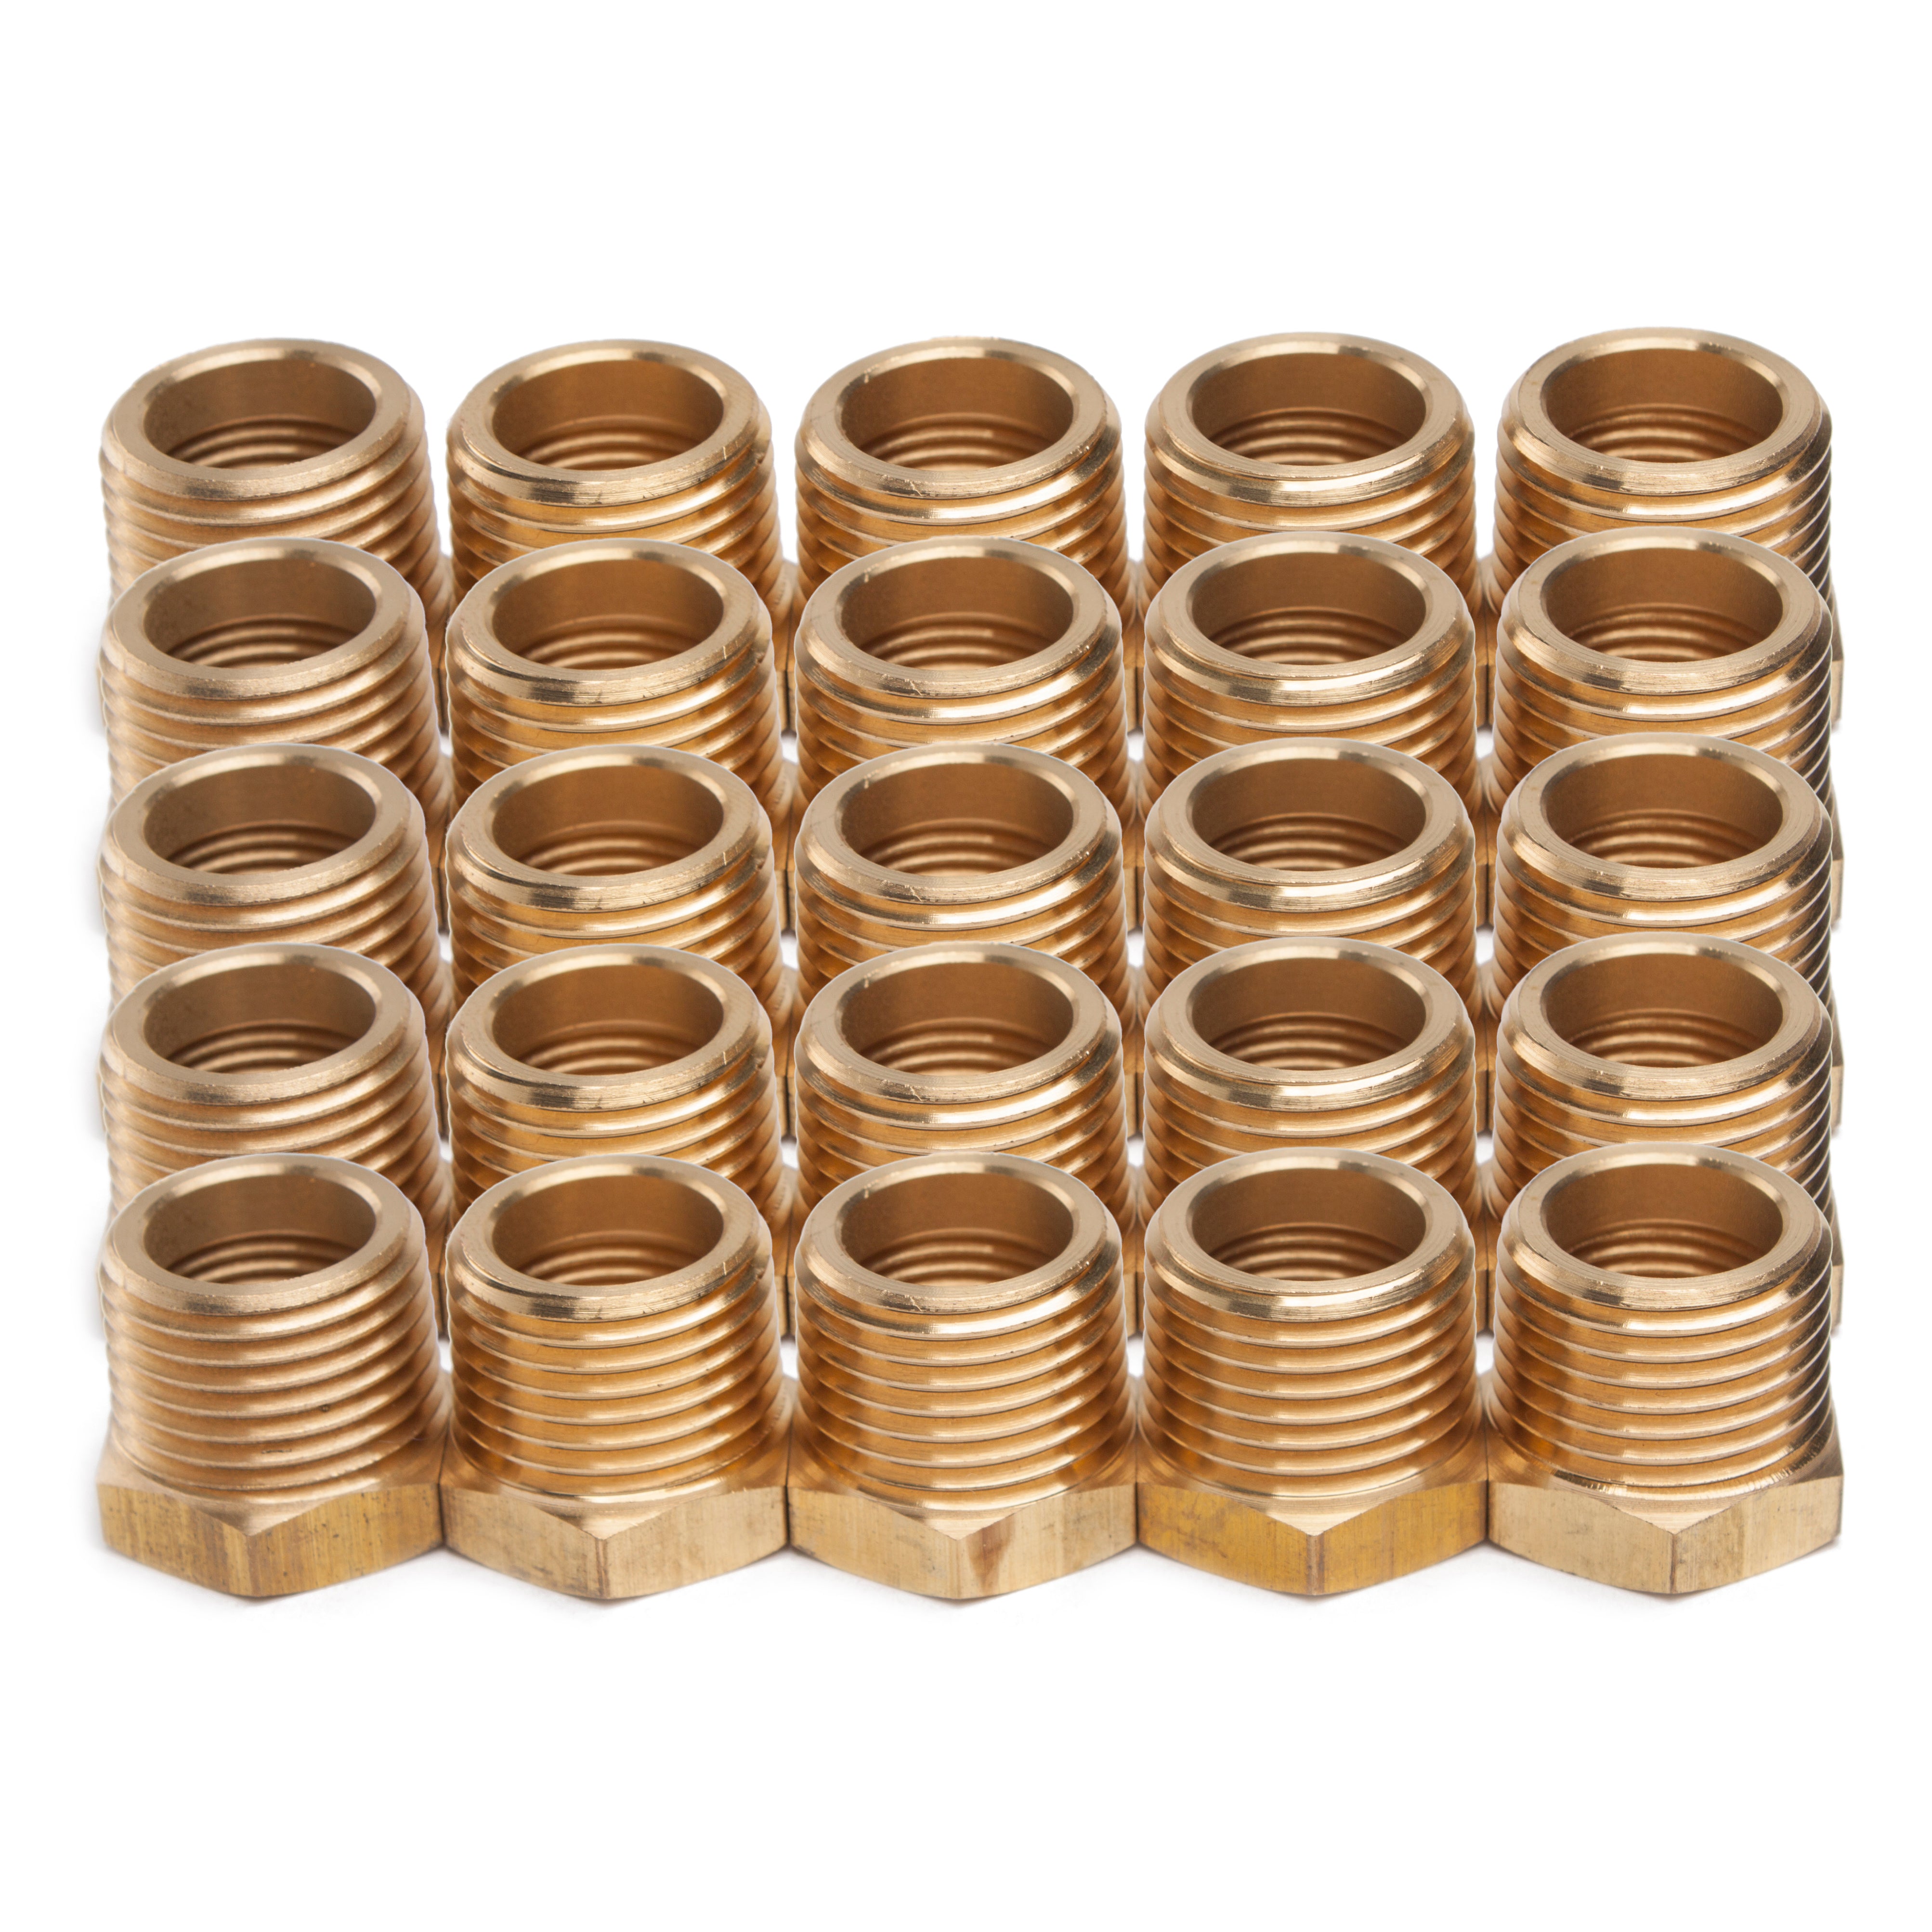 LTWFITTING Brass BSP Pipe Hex Bushing Reducer Fittings 1/2-Inch Male x 3/8-Inch Female BSPP (Pack of 25)